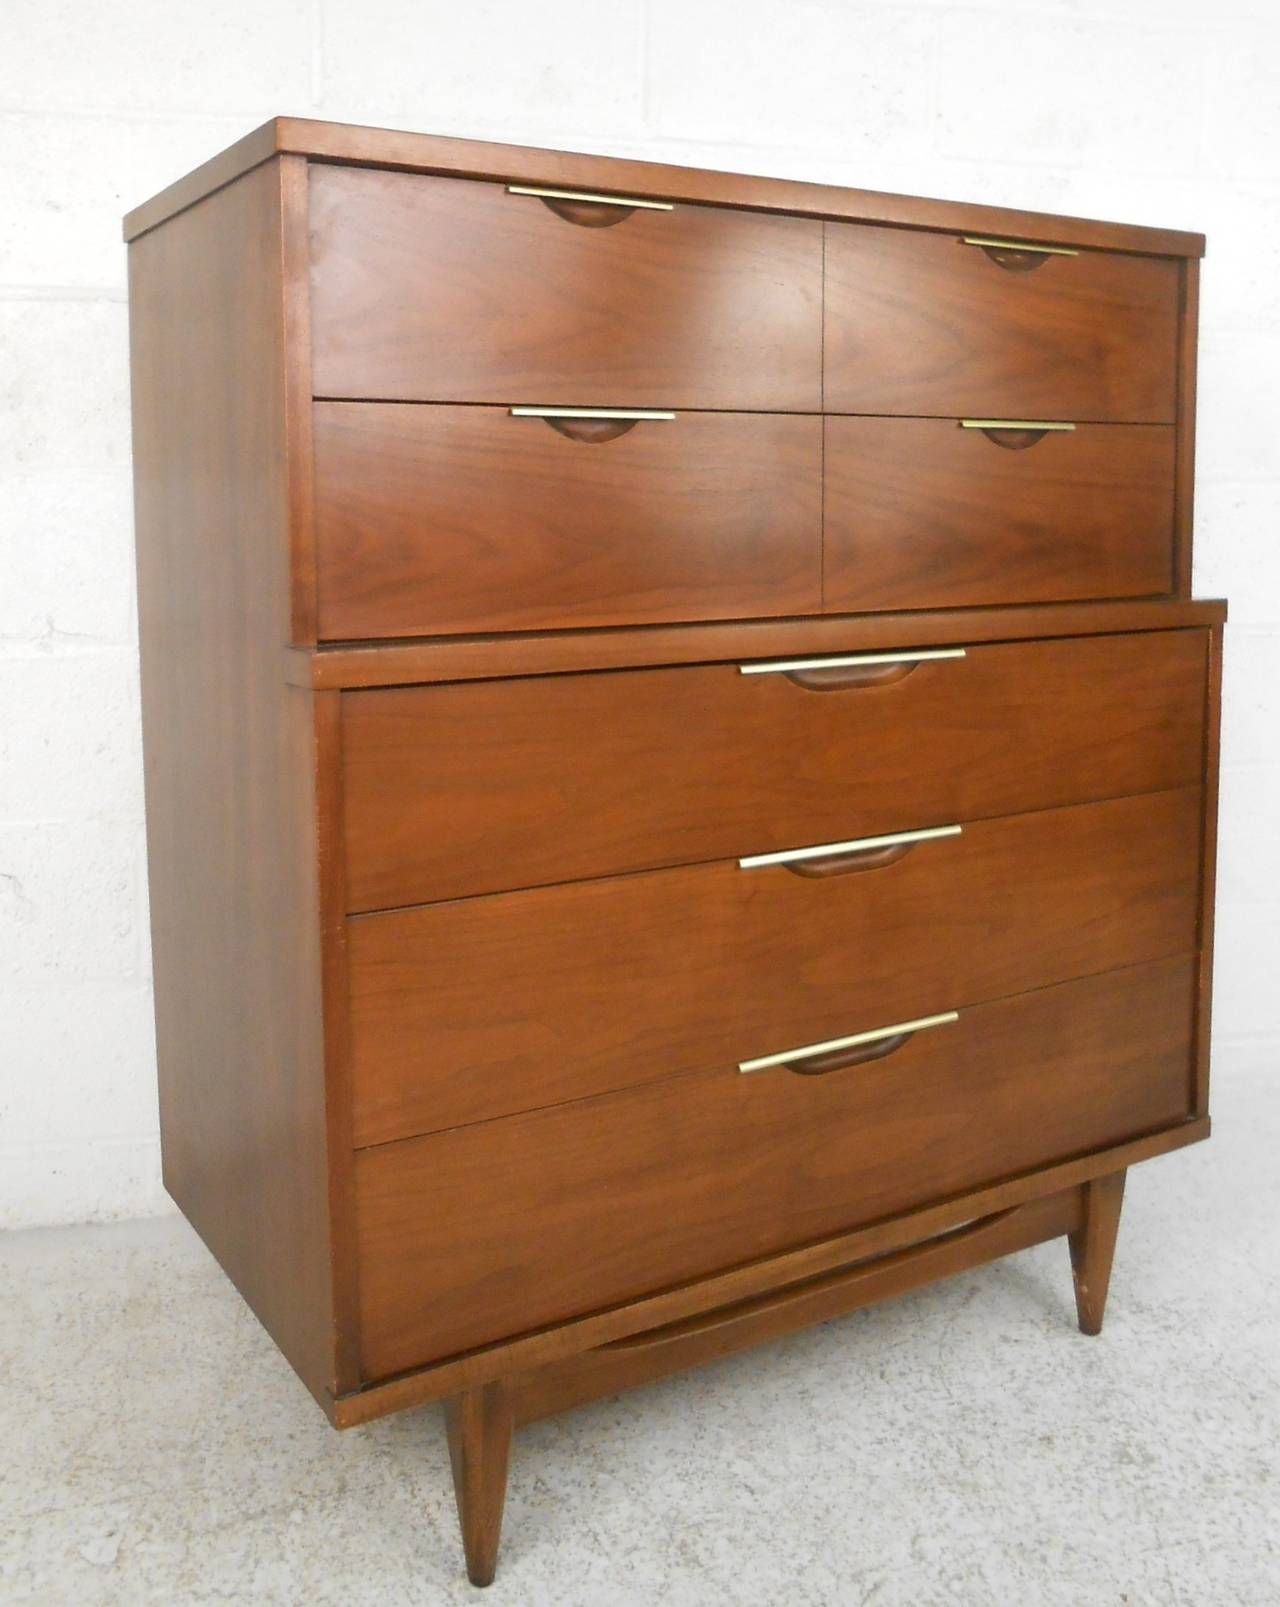 This beautiful mid-century highboy features the stunning design manufacturer Kent Coffey was so well known for. This piece for the Tableau furniture line features inlaid metal drawer pulls, sturdy hardwood construction, and stylish tapered legs.